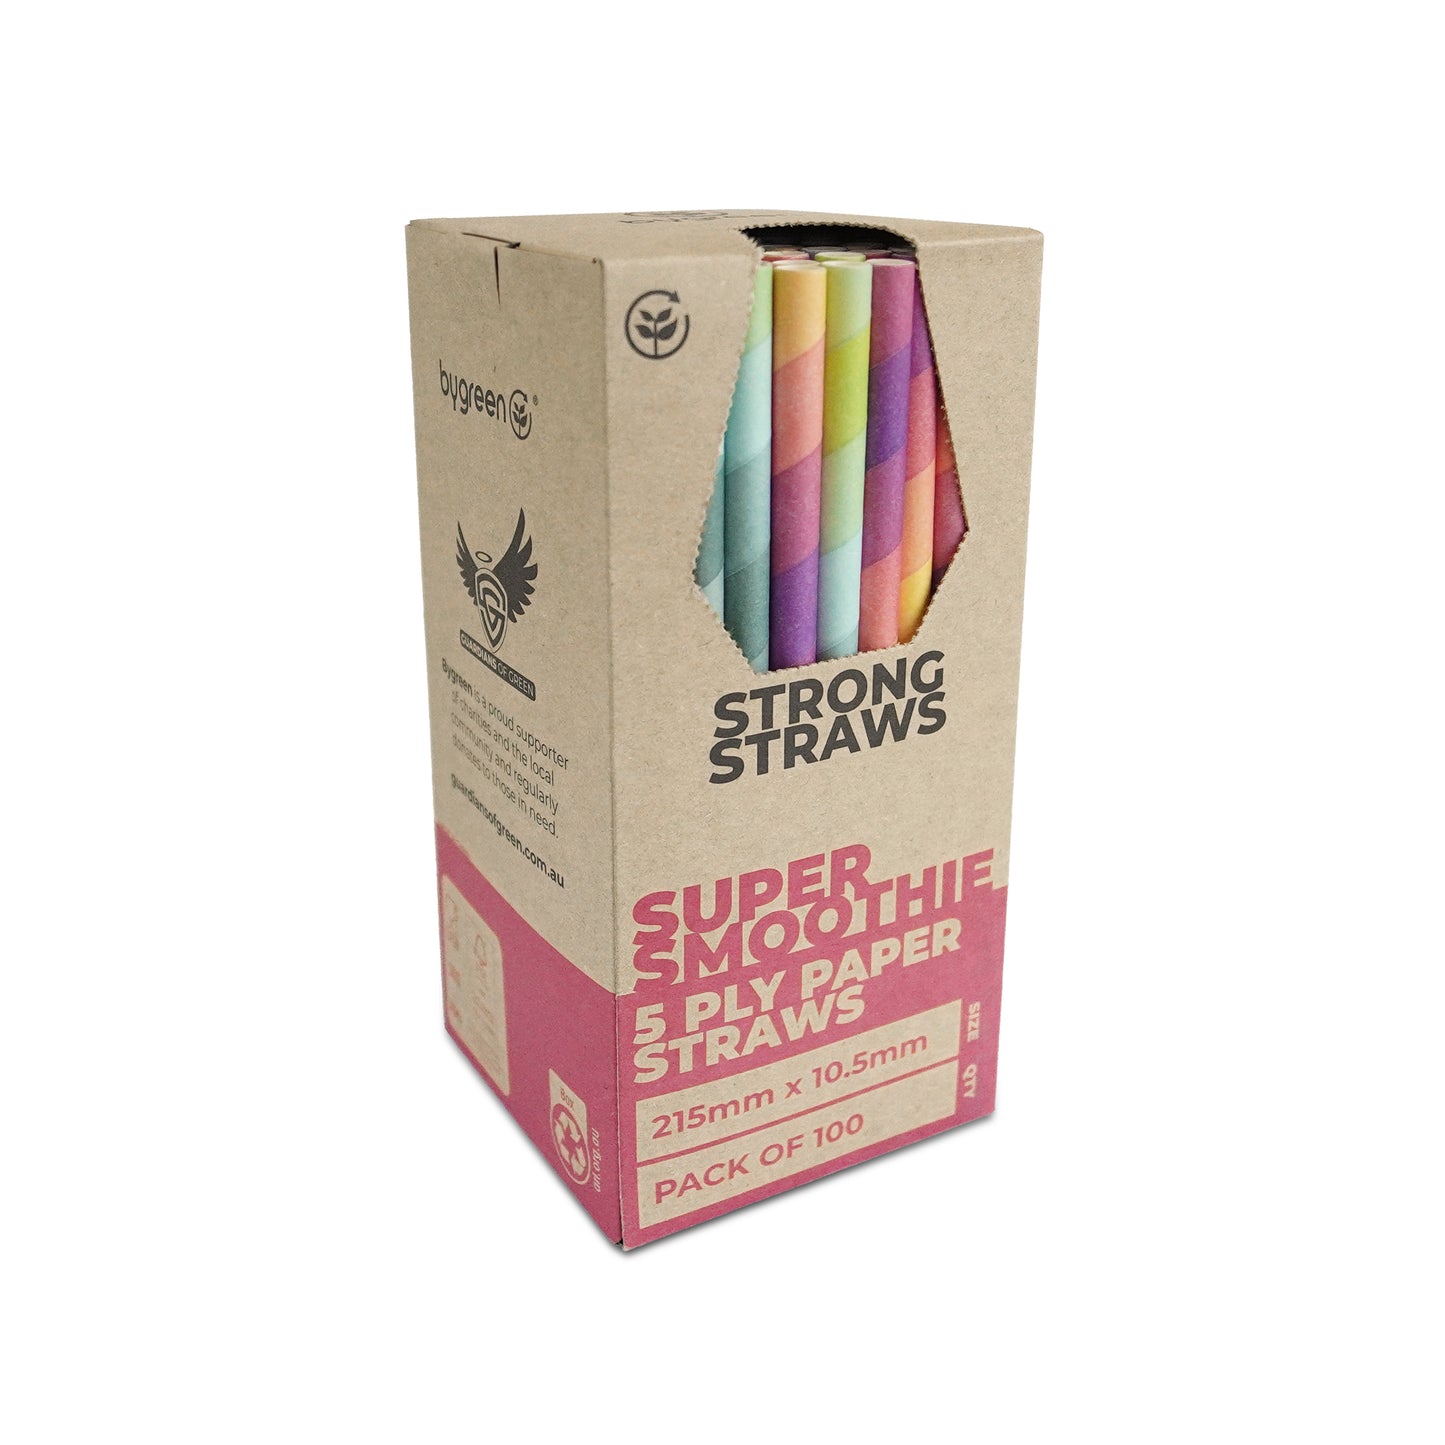 STRONG STRAWS - 5 PLY SUPER SMOOTHIE PAPER STRAW - MIXED COLOURS